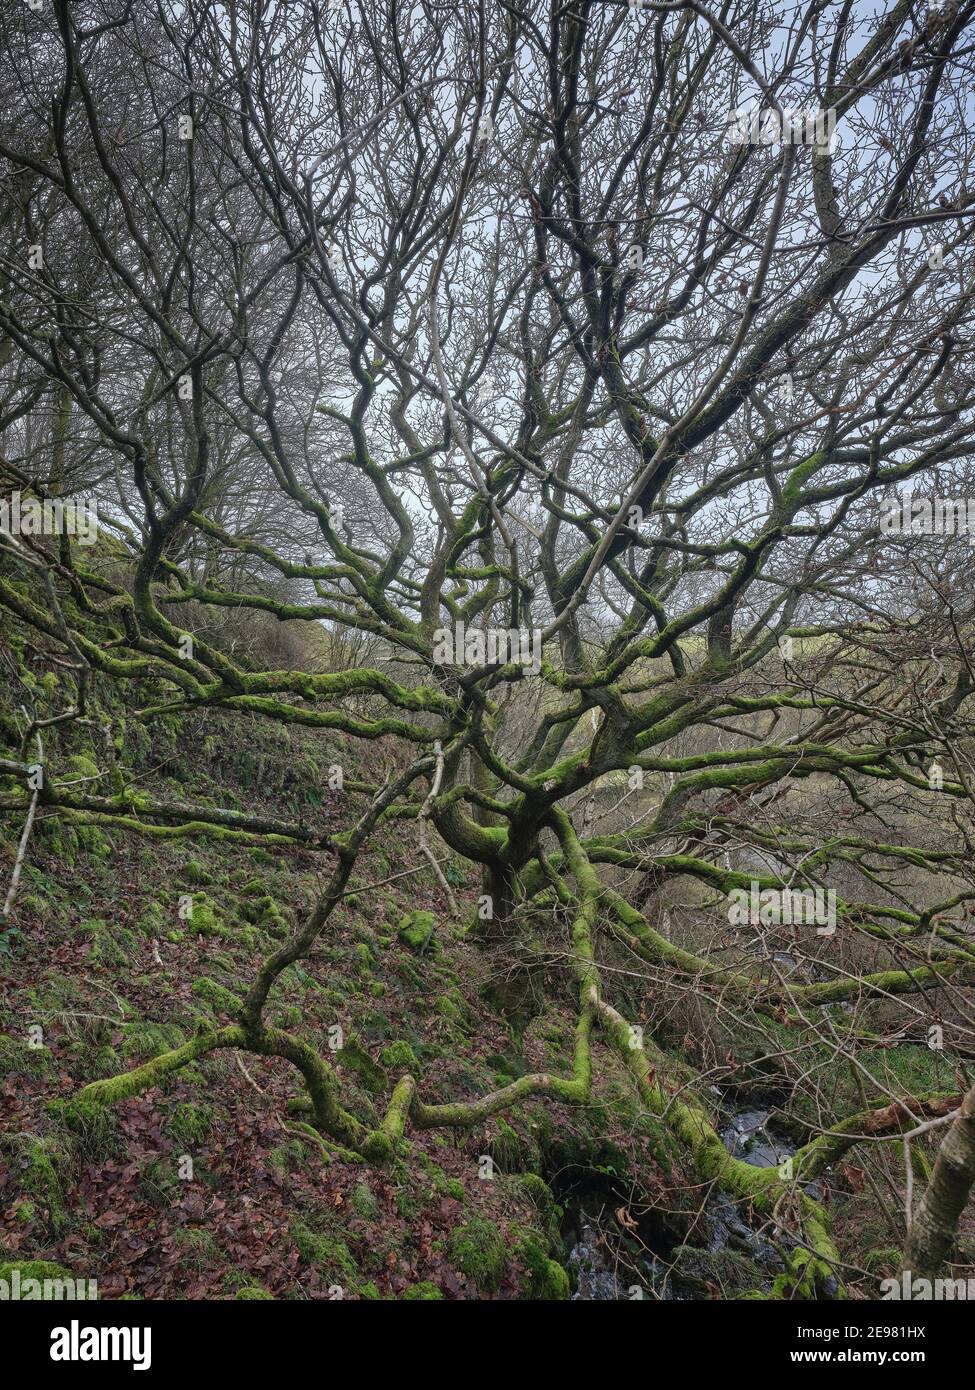 A bare oak and in January the Dales woodland begins to ready itself for spring. Stock Photo